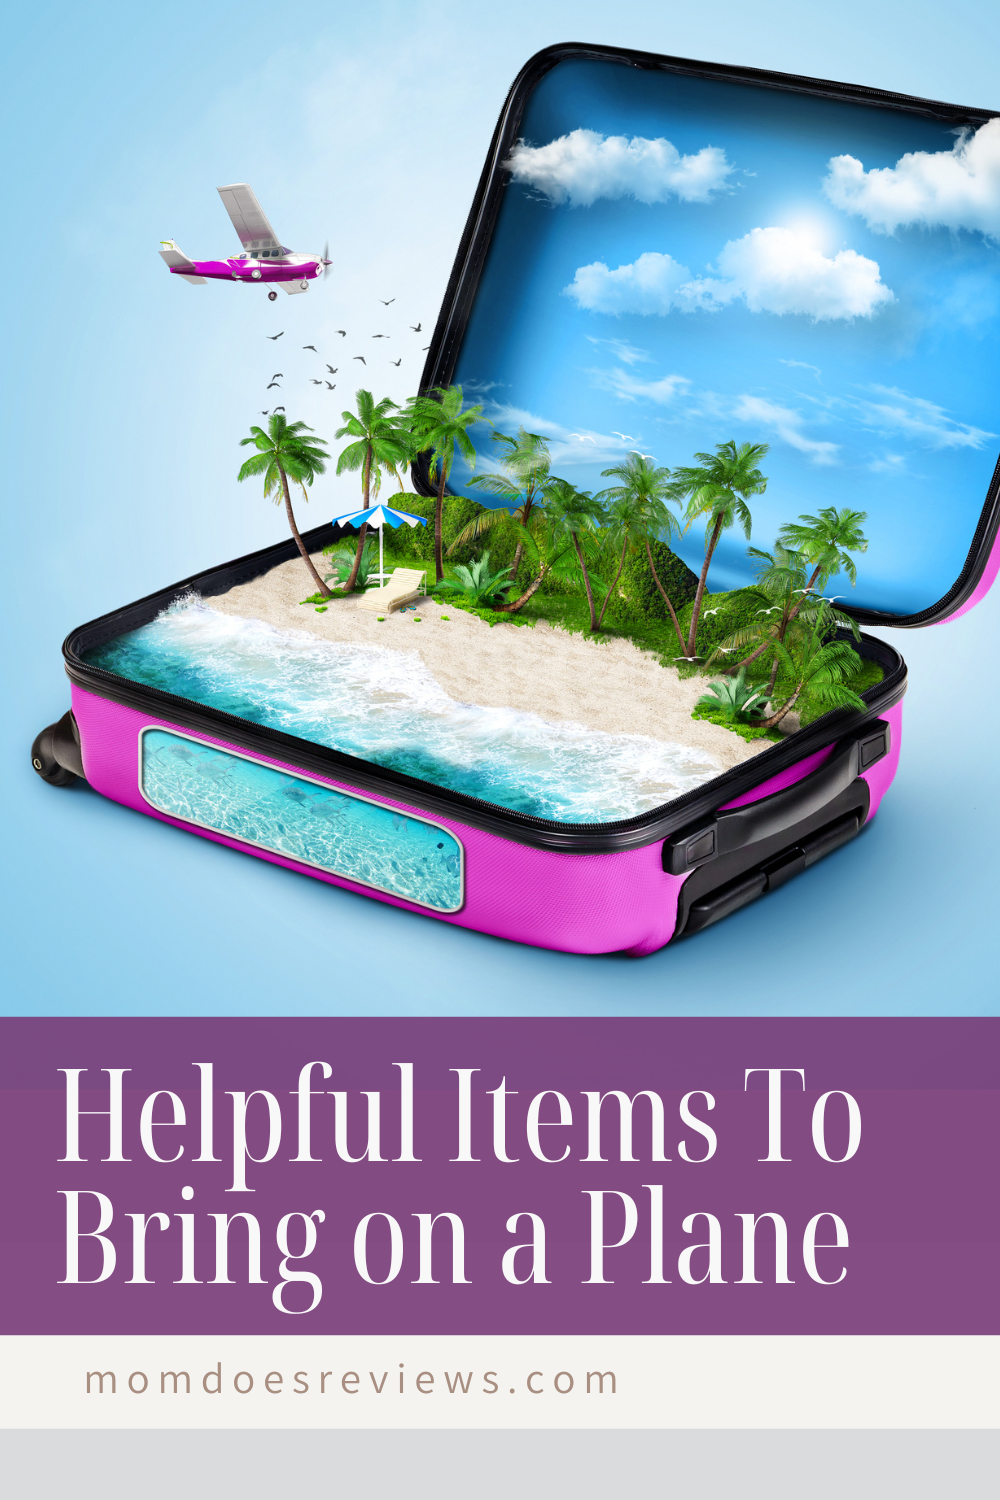 Items To Bring on a Plane and the Best Way To Do It